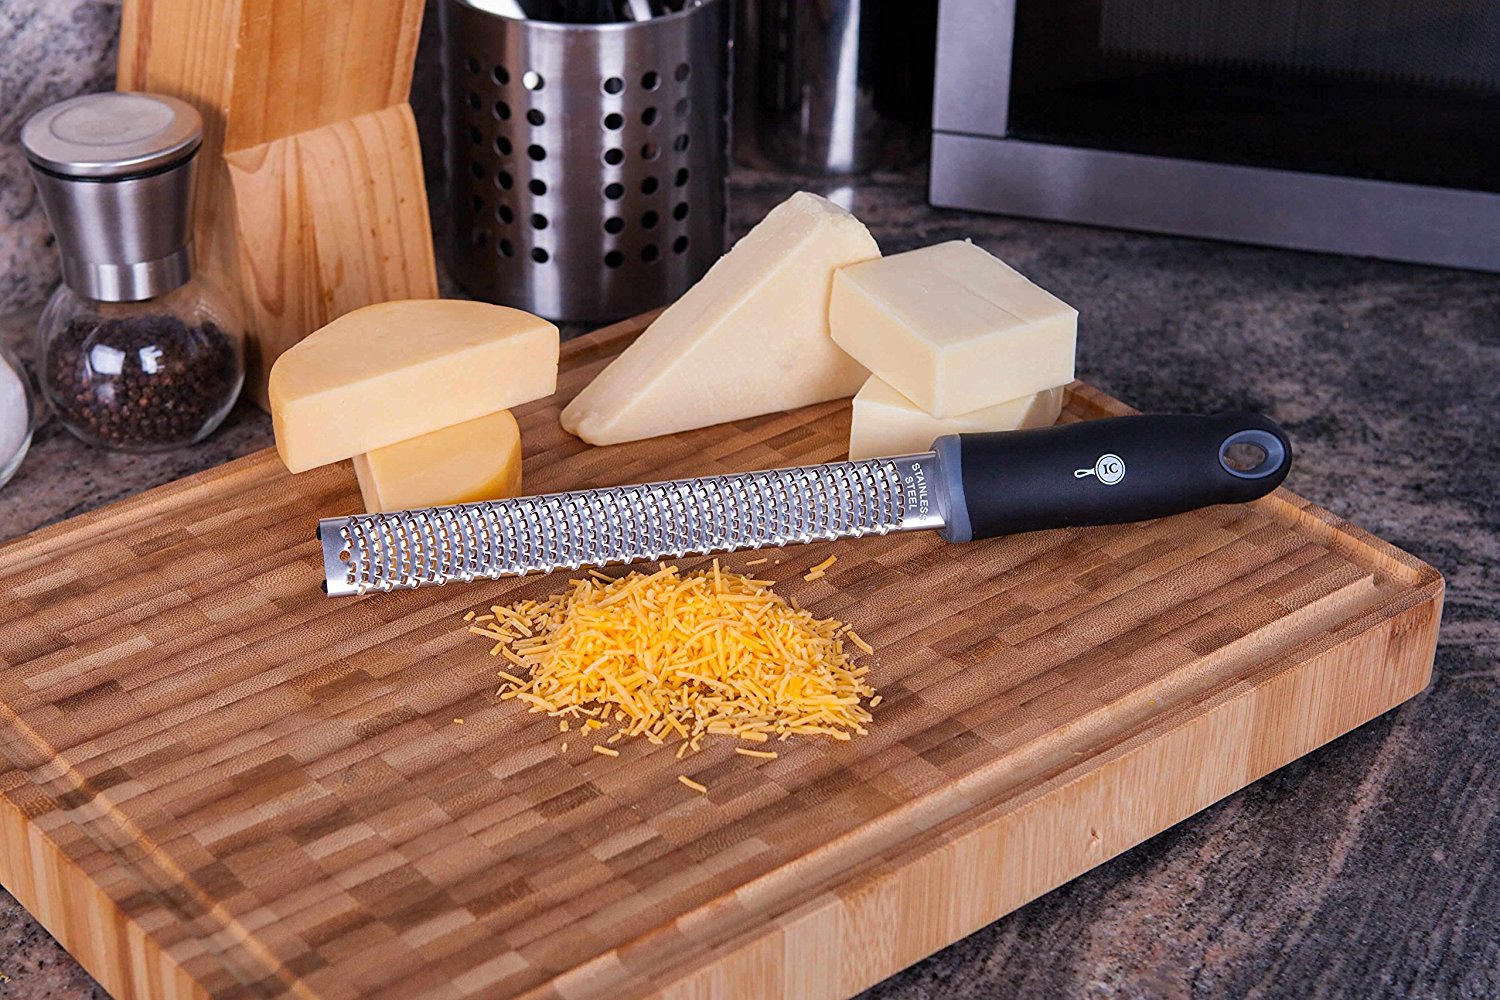 Catch Maik 304 Stainless Steel Zester Grater Kitchen Tool For Fruits &  Vegetables - Cheese,Lemon, Ginger, Garlic & Citrus Zester With Sharp  Stainless Steel Blade + Protective Cover & Cleaning Brush on